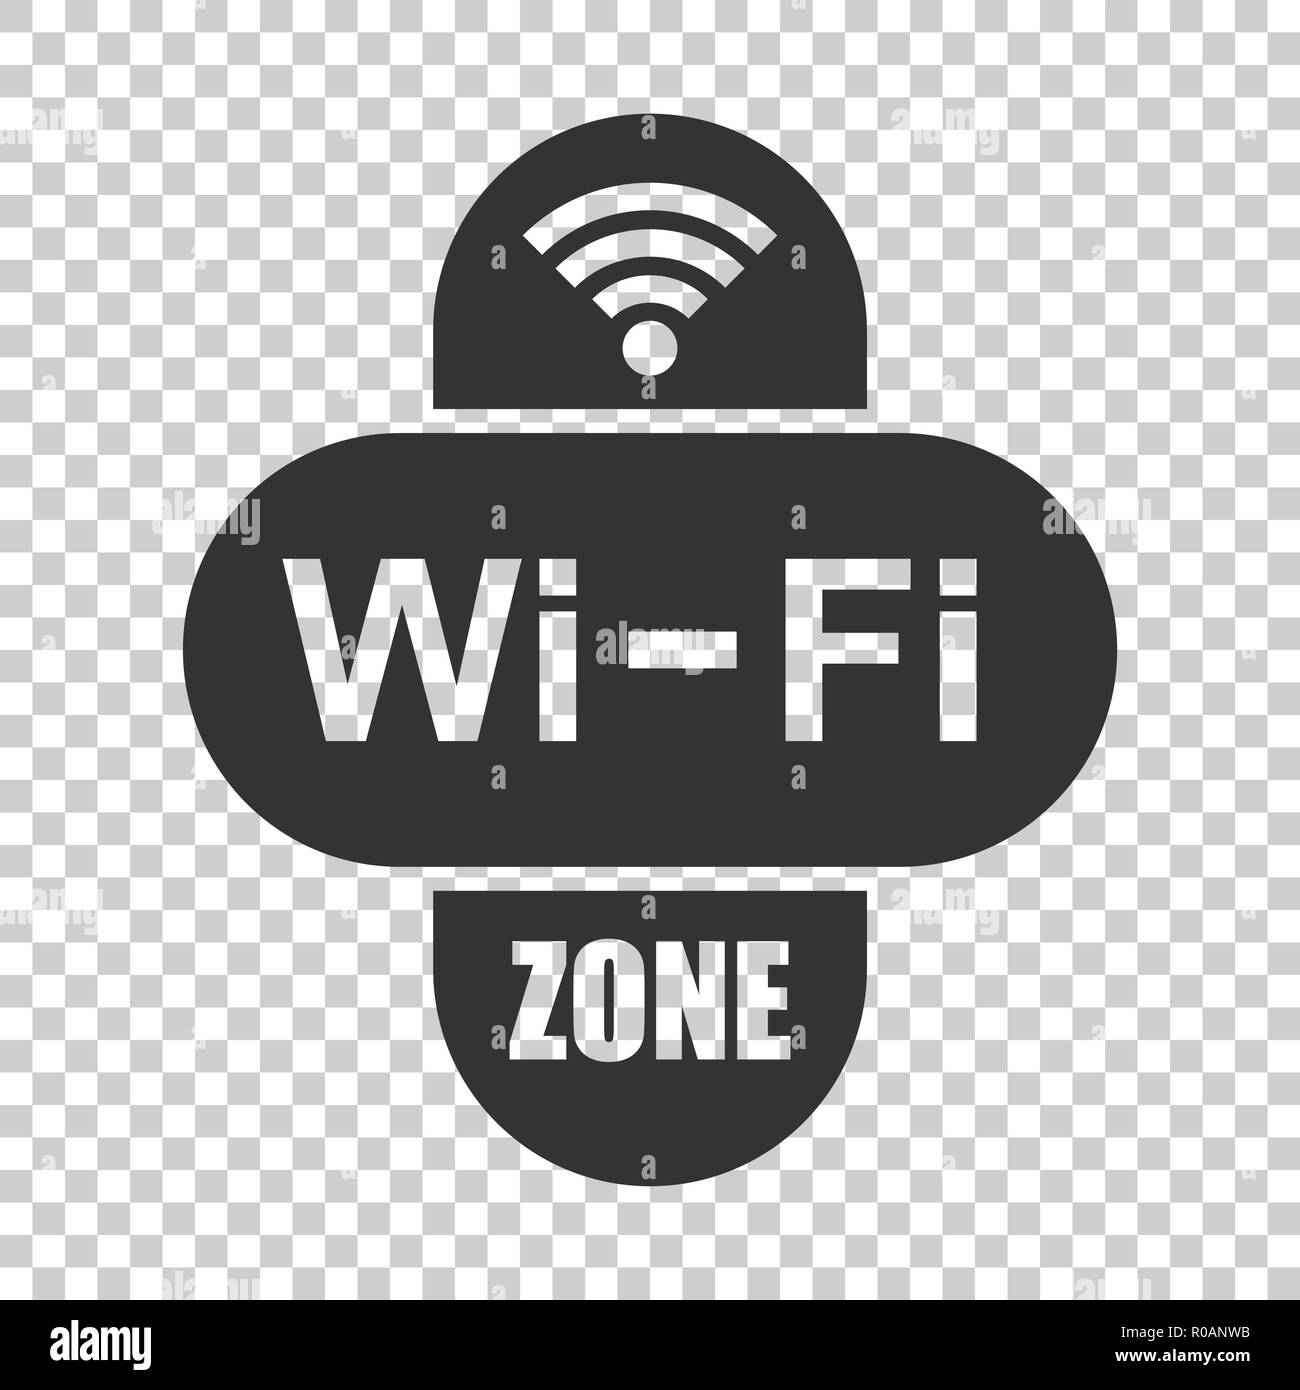 Wifi zone internet sign icon in flat style. Wi-fi wireless technology vector illustration on isolated background. Network wifi zone business concept. Stock Vector